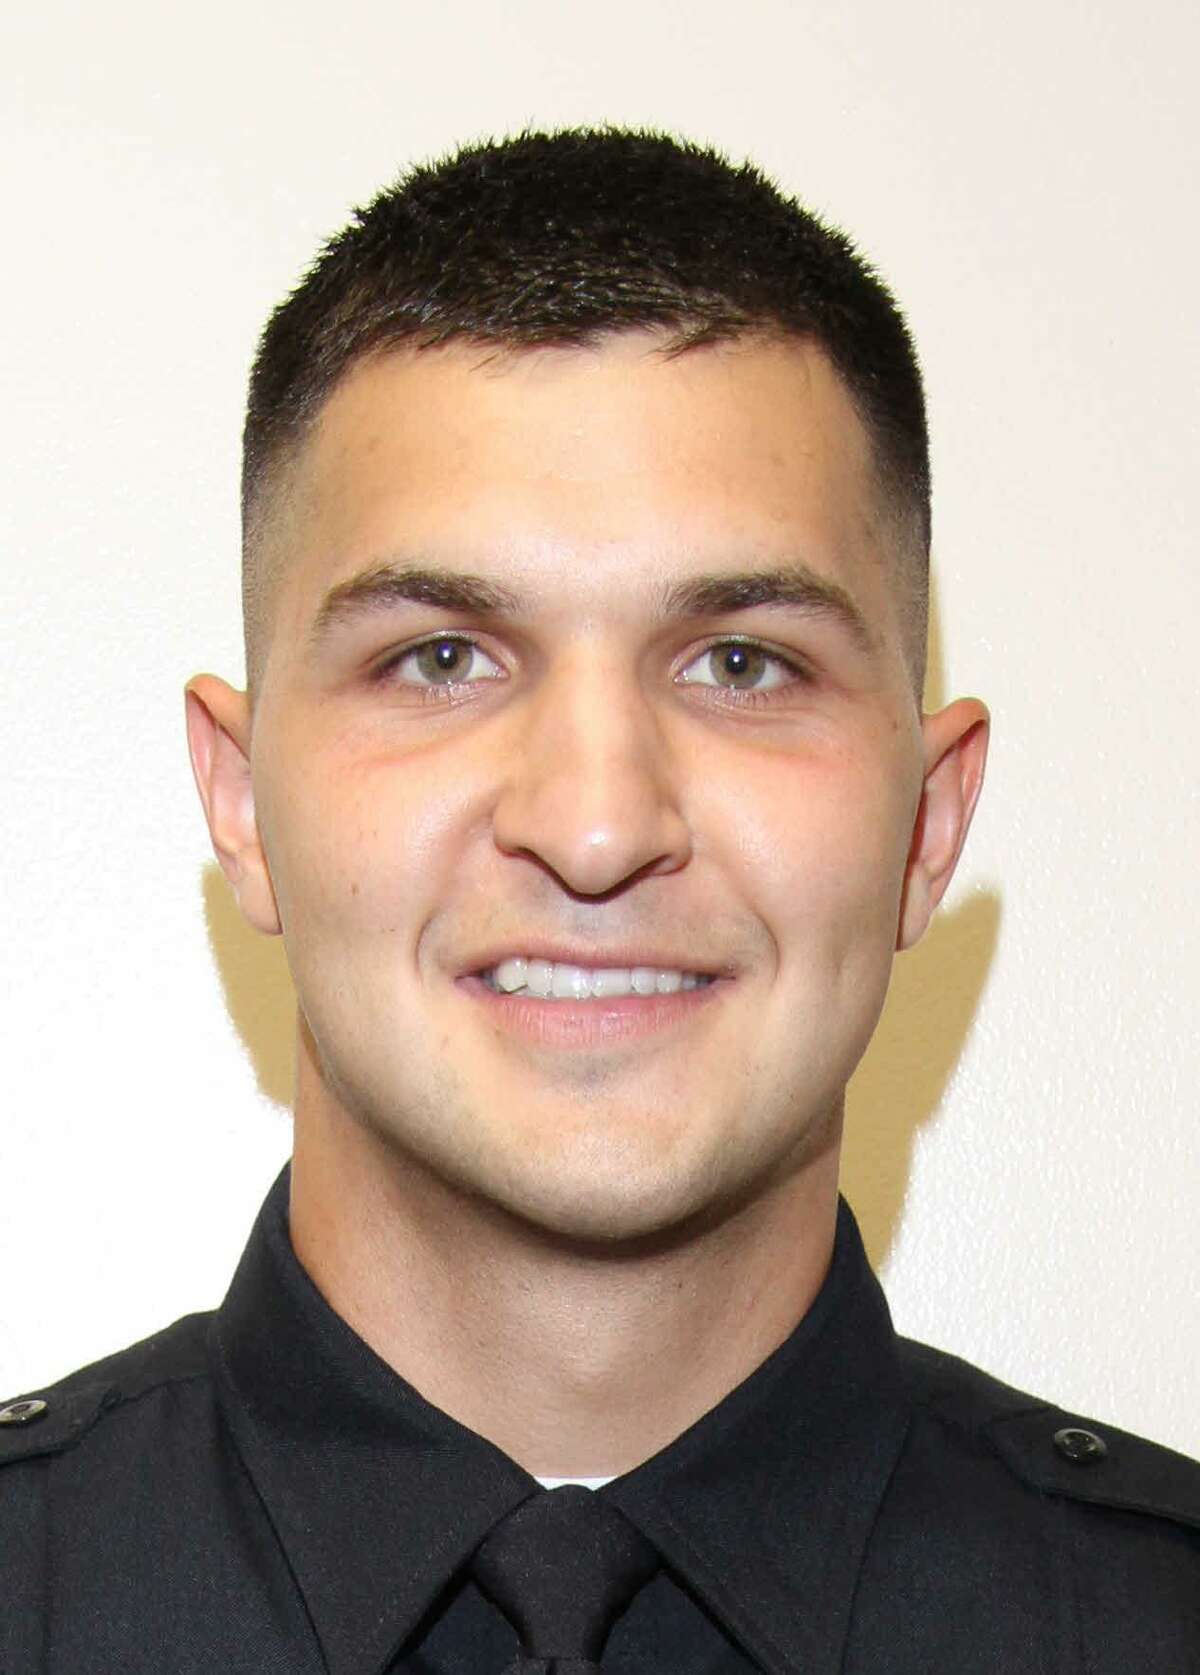 Officer Thomas H. Villarreal was fired in July after police say he used excessive force in punching a suspect who had fled on foot after a traffic stop.